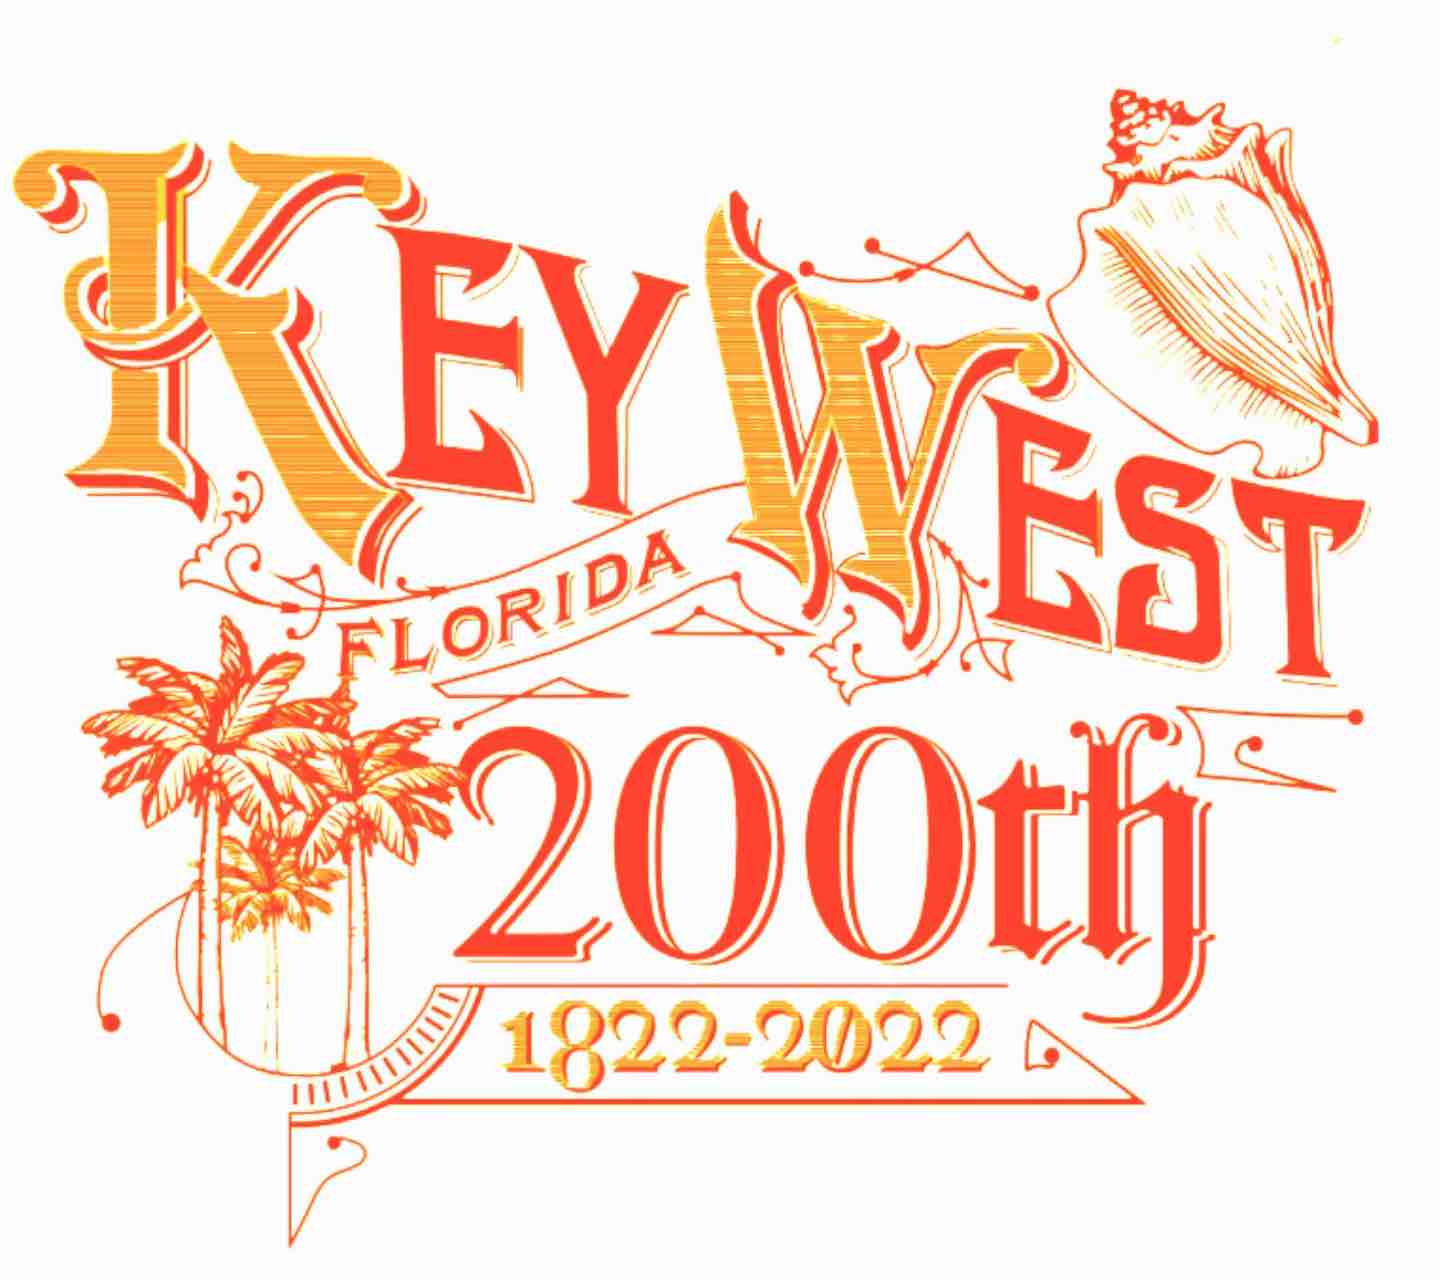 Key West Florida 200th anniversary sign in yellow and red with a conch shell and palm trees